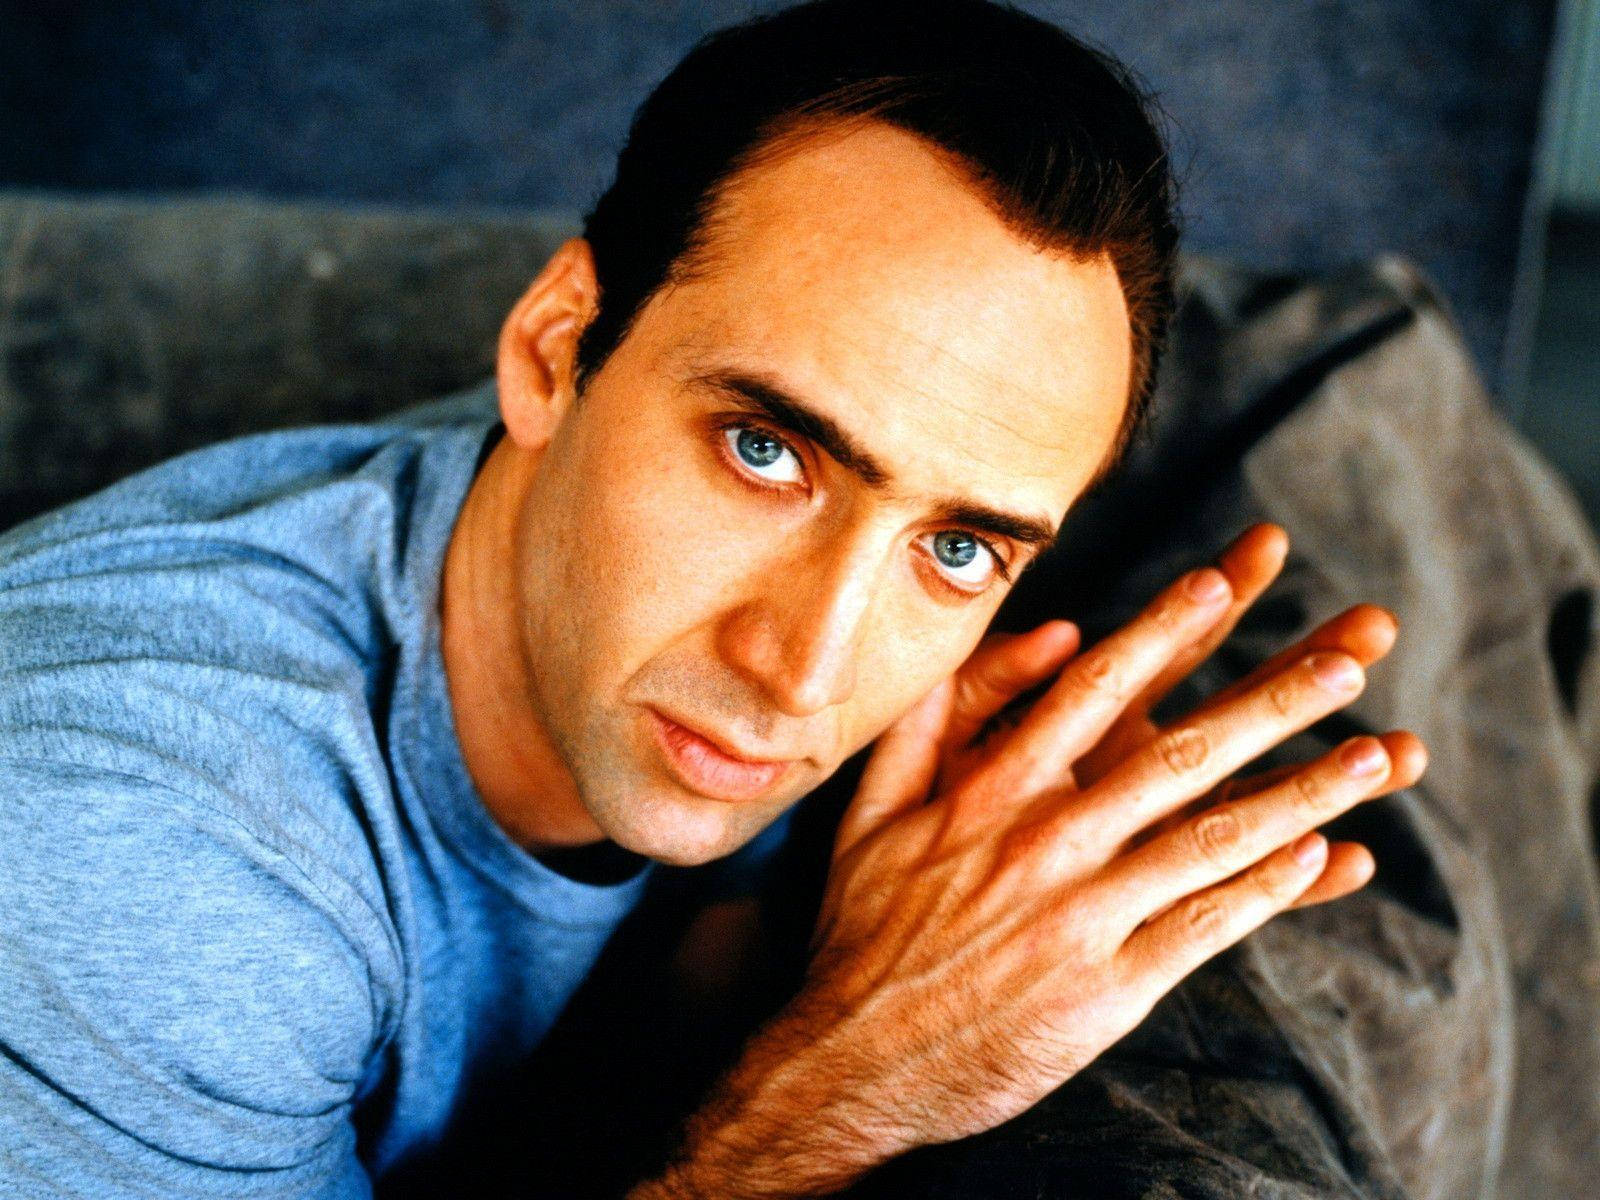 Nicolas Cage On The Couch